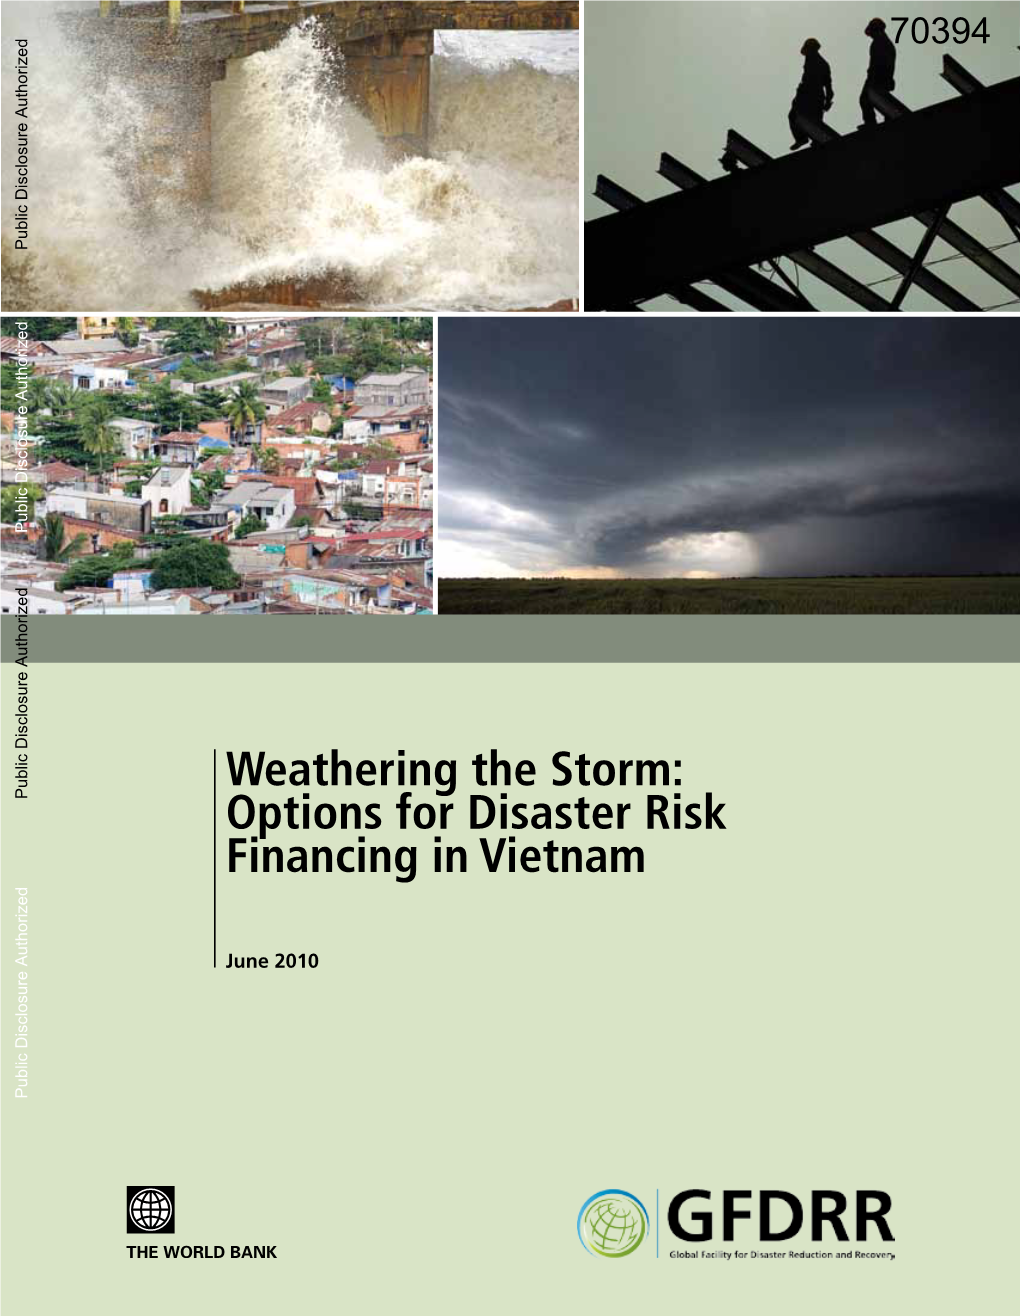 Weathering the Storm: Options for Disaster Risk Financing in Vietnam Public Disclosure Authorized